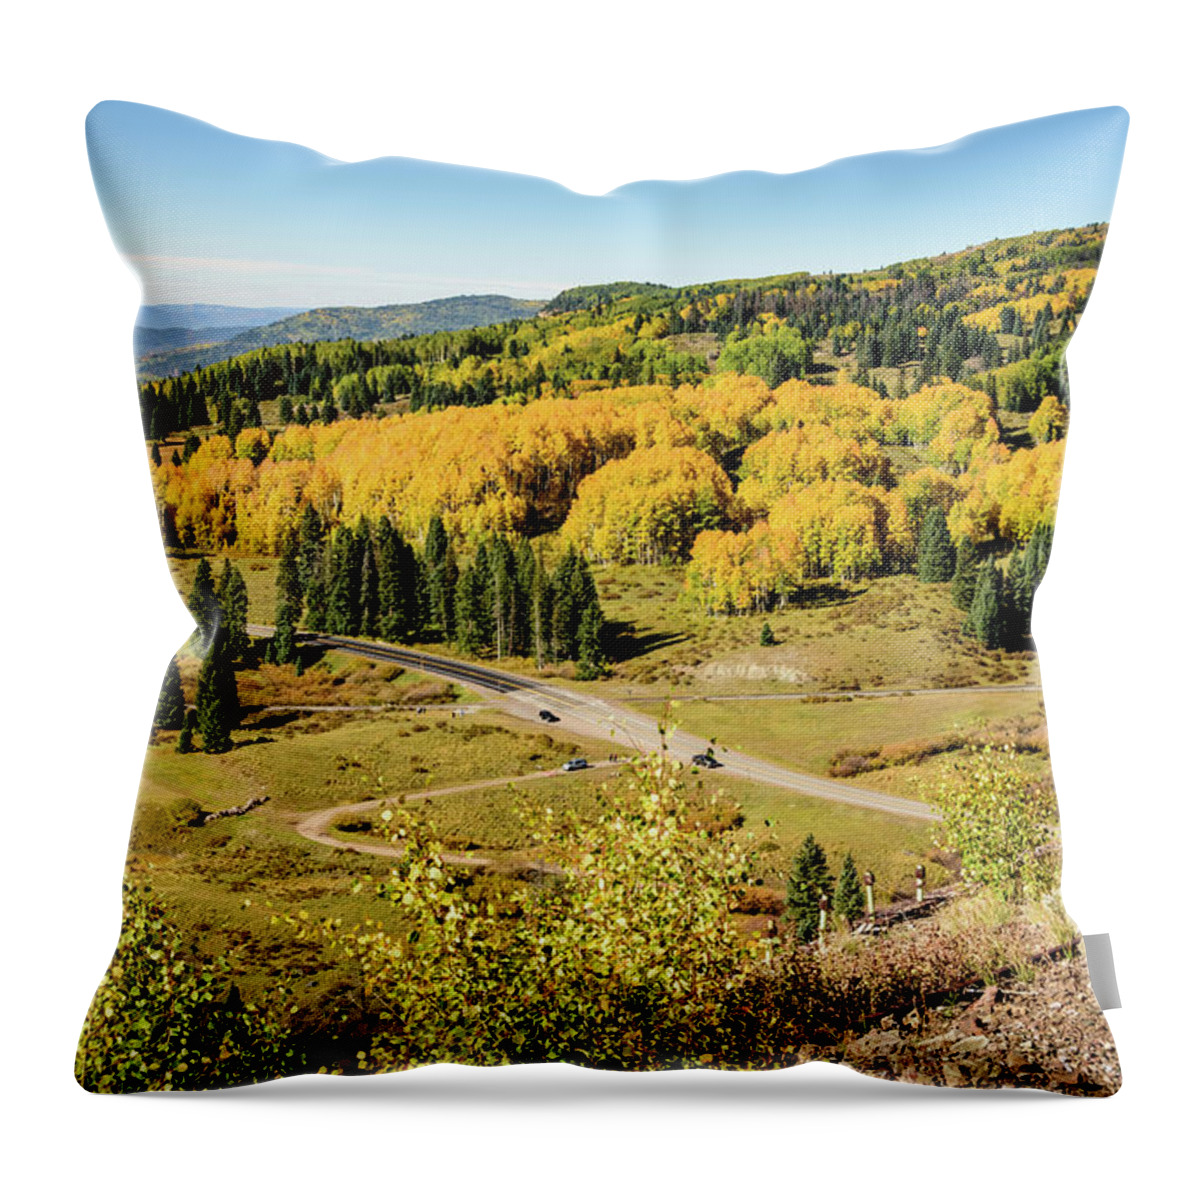 Windy Point View - Cumbres Pass - Colorado 2 Throw Pillow featuring the photograph Windy Point View - Cumbres Pass - Colorado 2 by Debra Martz